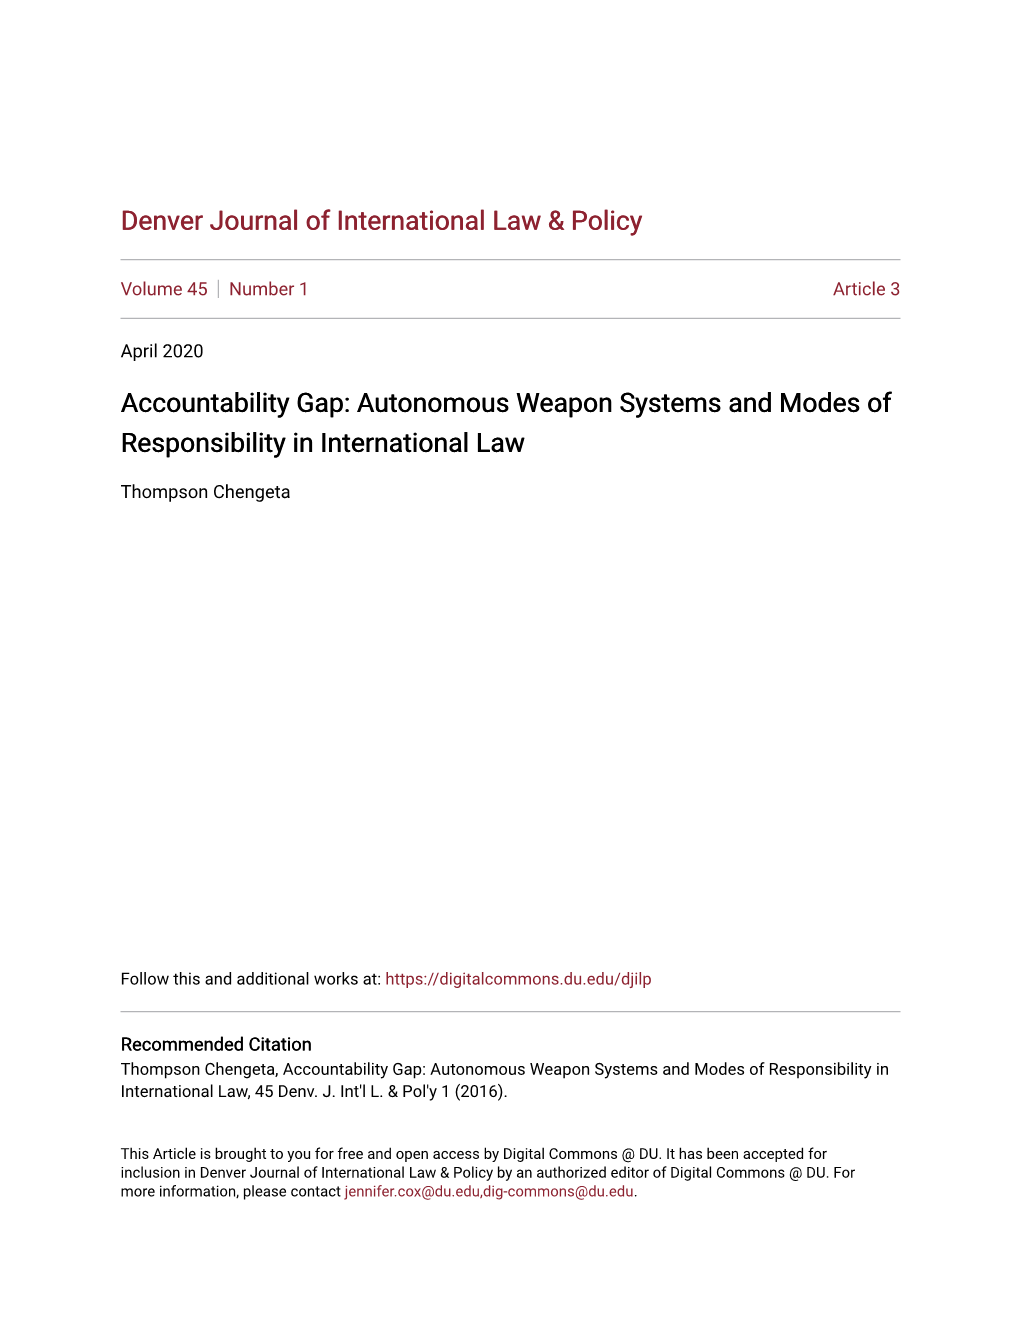 Accountability Gap: Autonomous Weapon Systems and Modes of Responsibility in International Law